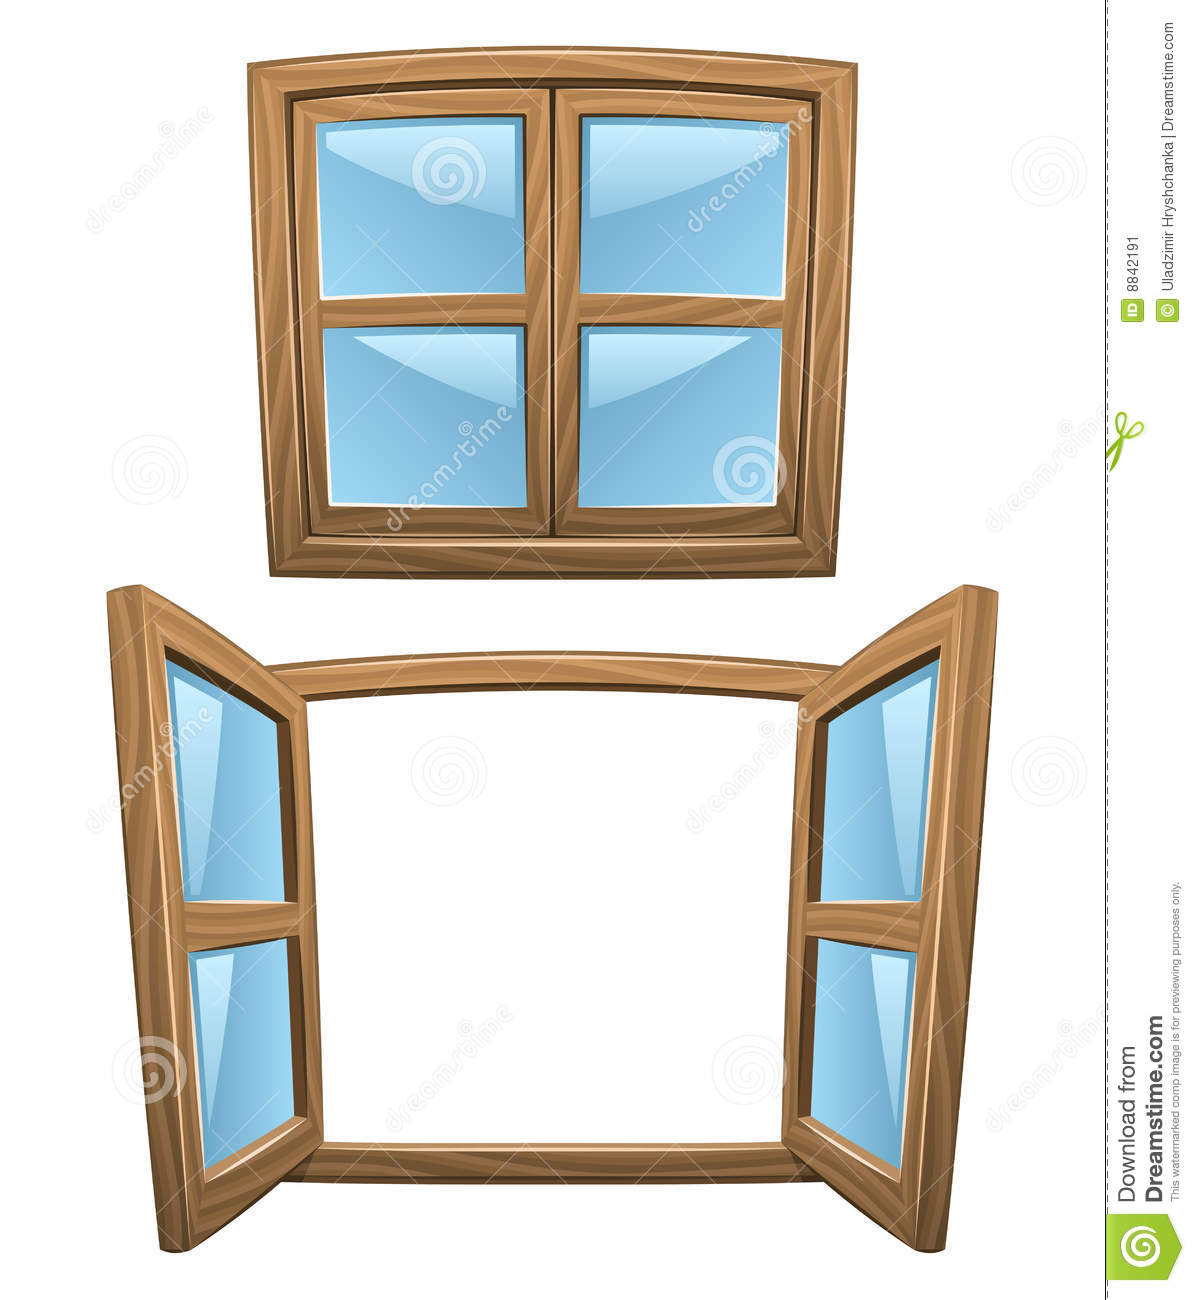 Open Window Clipart   Clipart Panda   Free Clipart Images